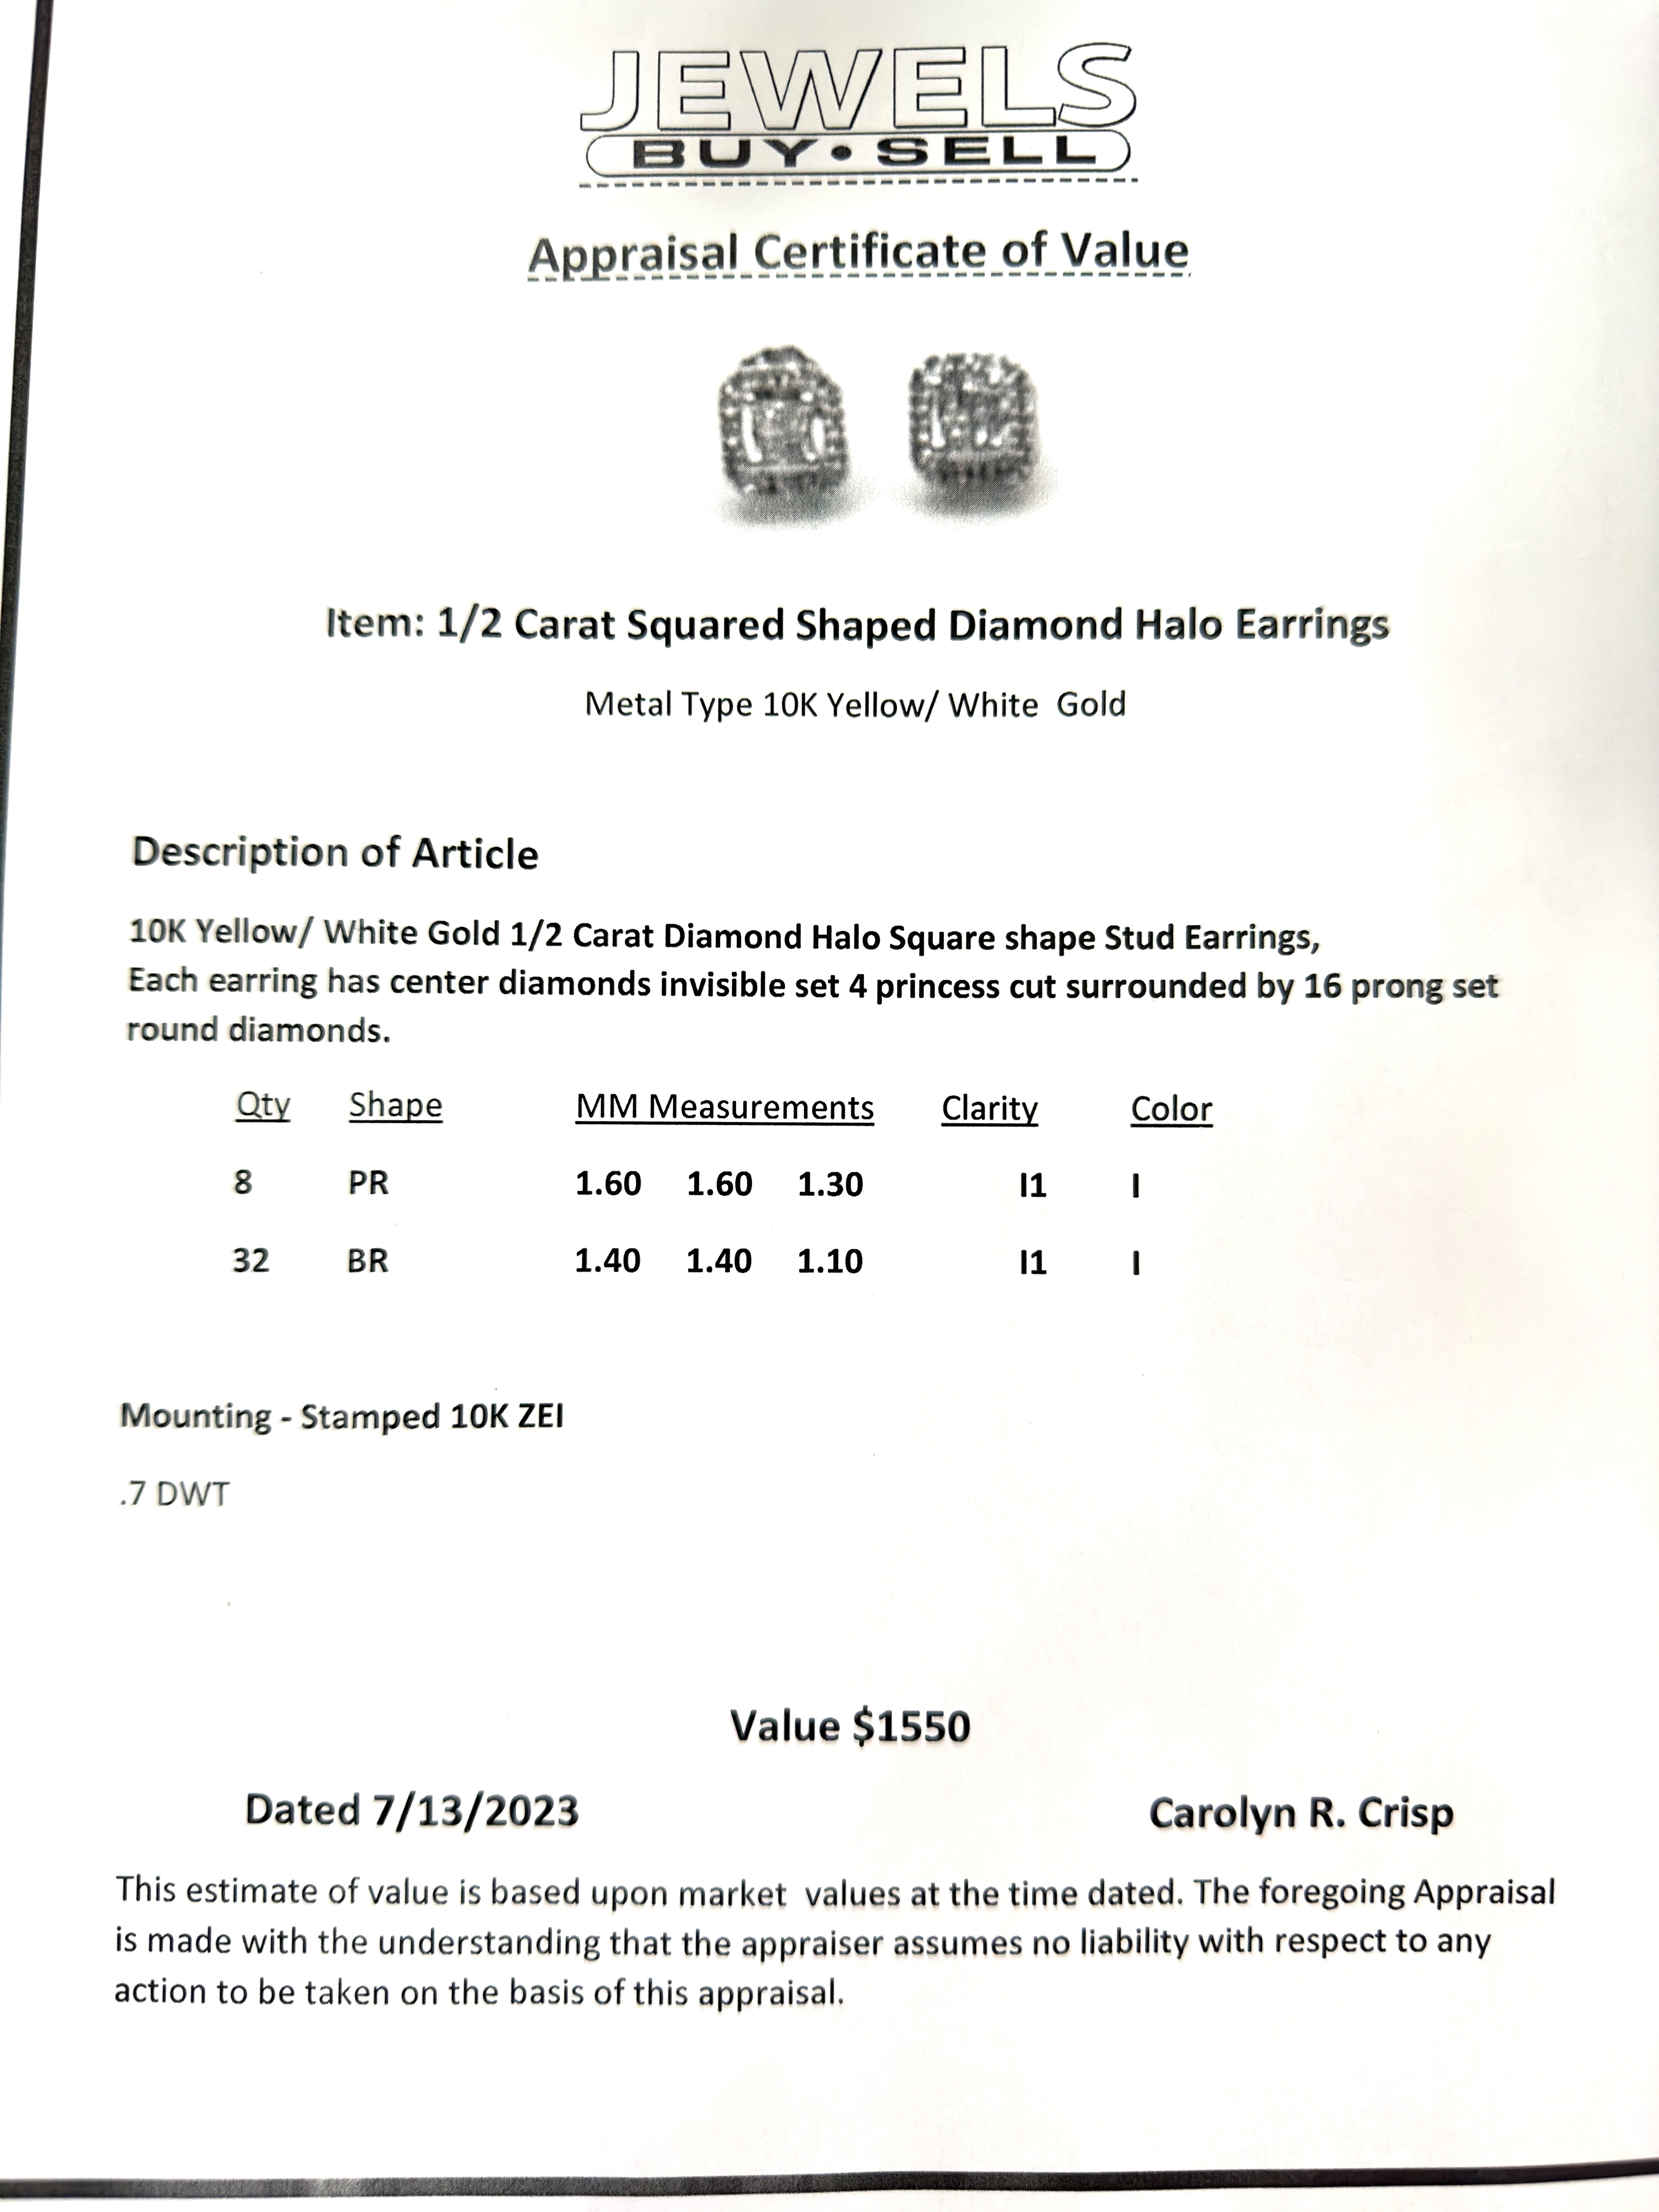 10k Yellow Gold 40 Diamond Squared Halo Errings with Appraisal 1